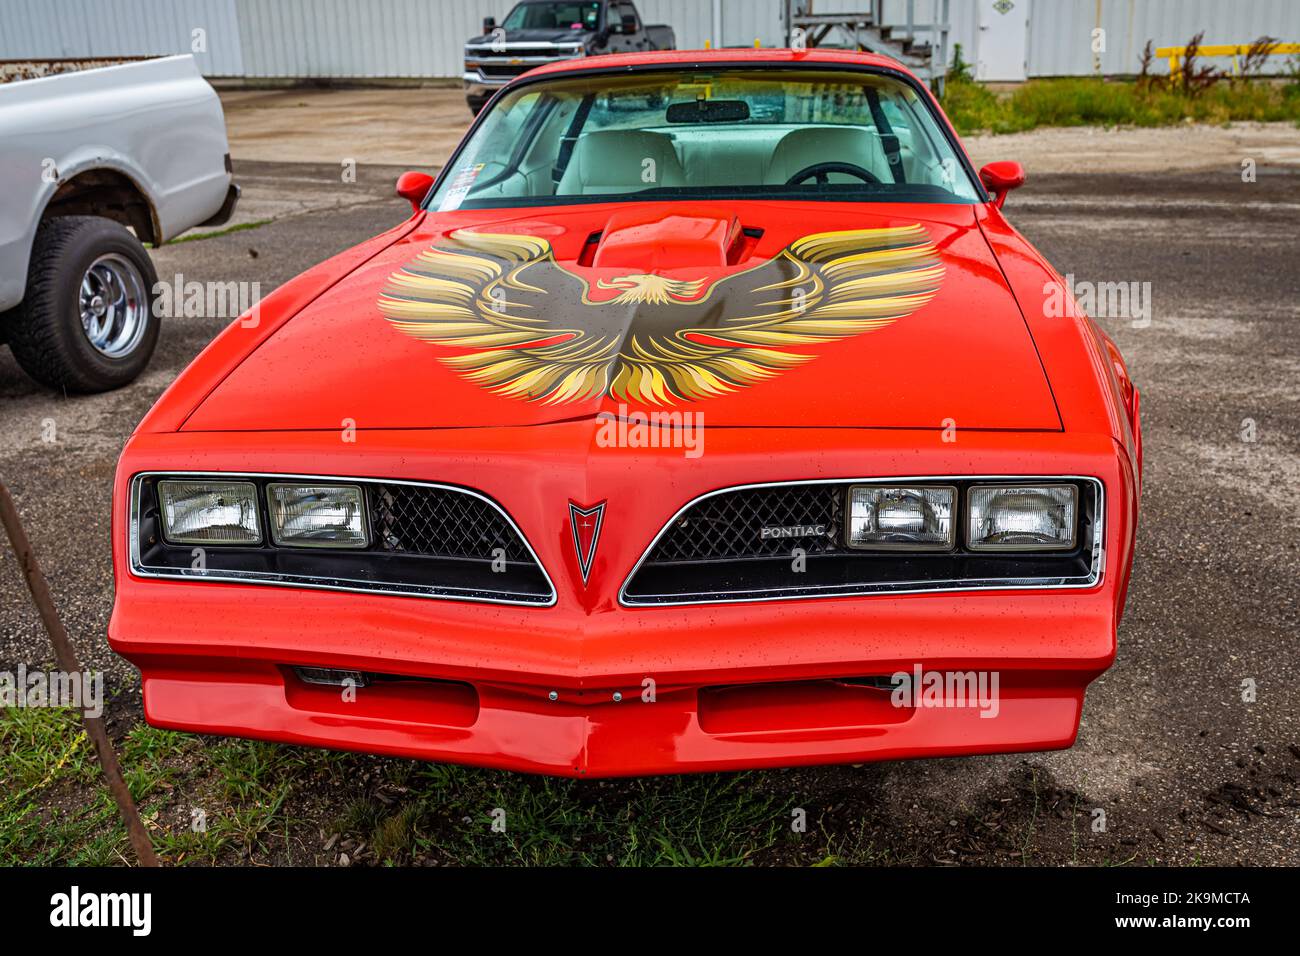 Des Moines, IA - July 01, 2022: High perspective front view of a 1978 Pontiac Firebird Trans Am at a local car show. Stock Photo